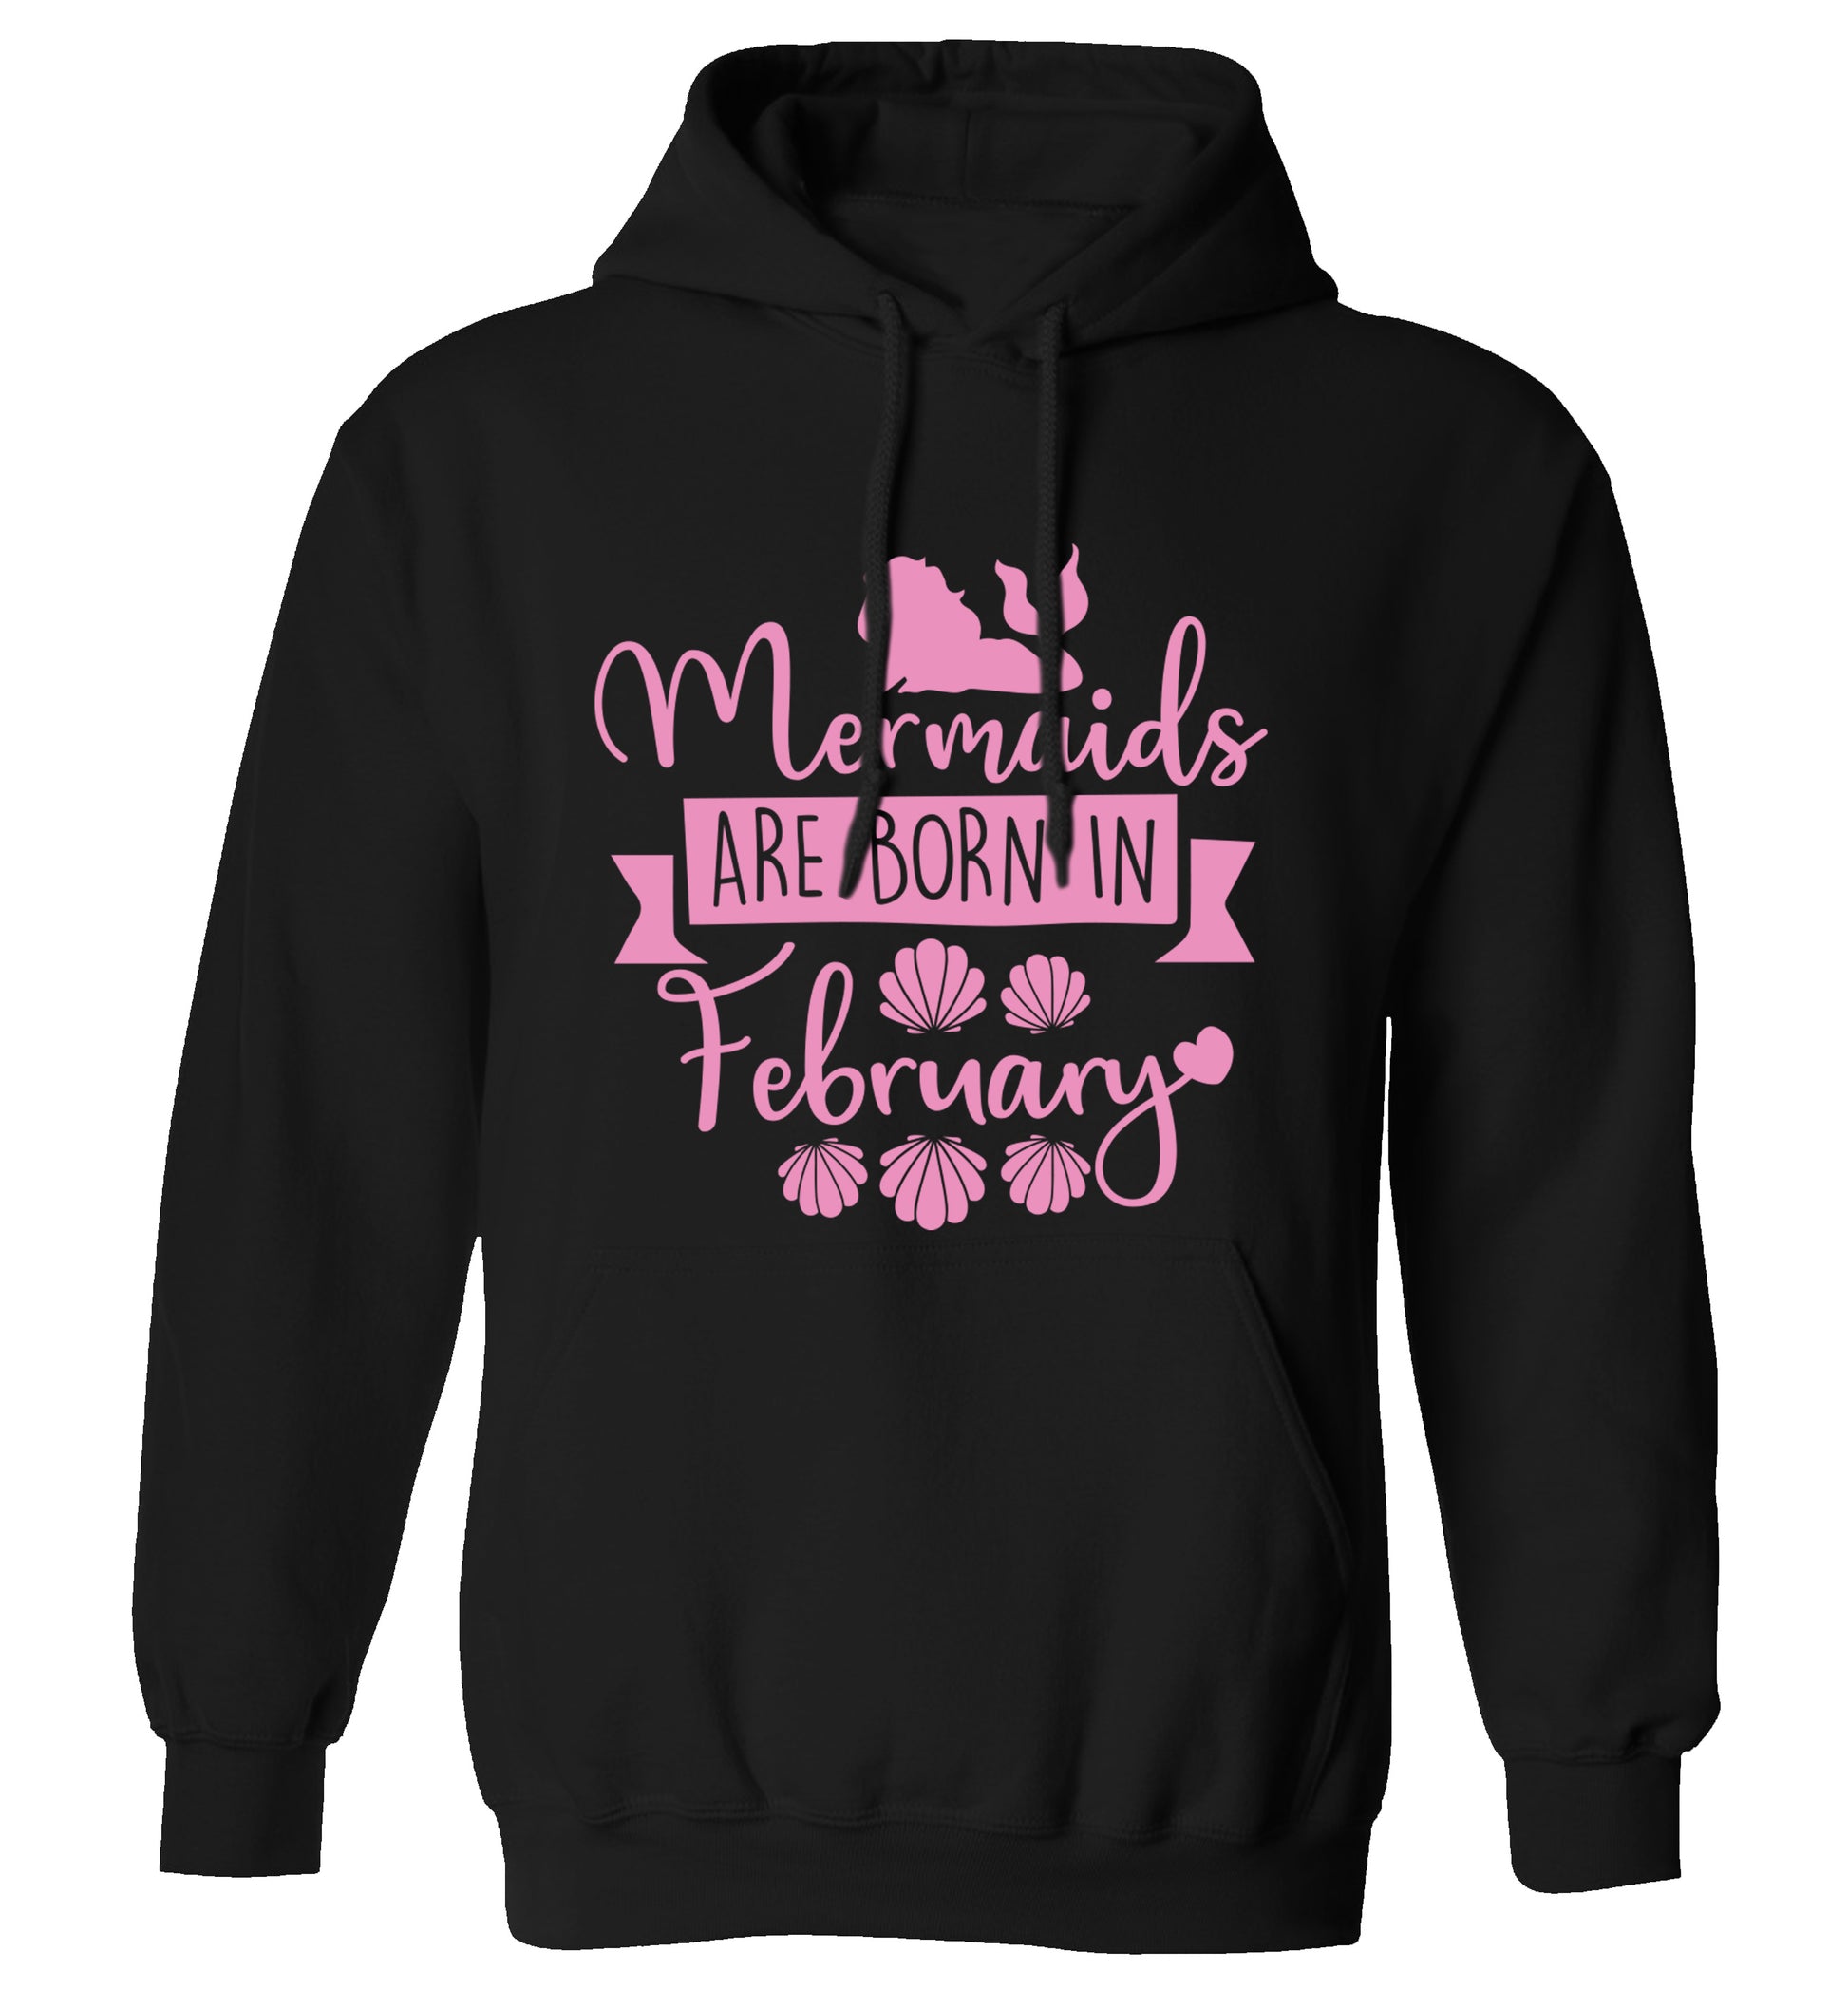 Mermaids are born in February adults unisex black hoodie 2XL